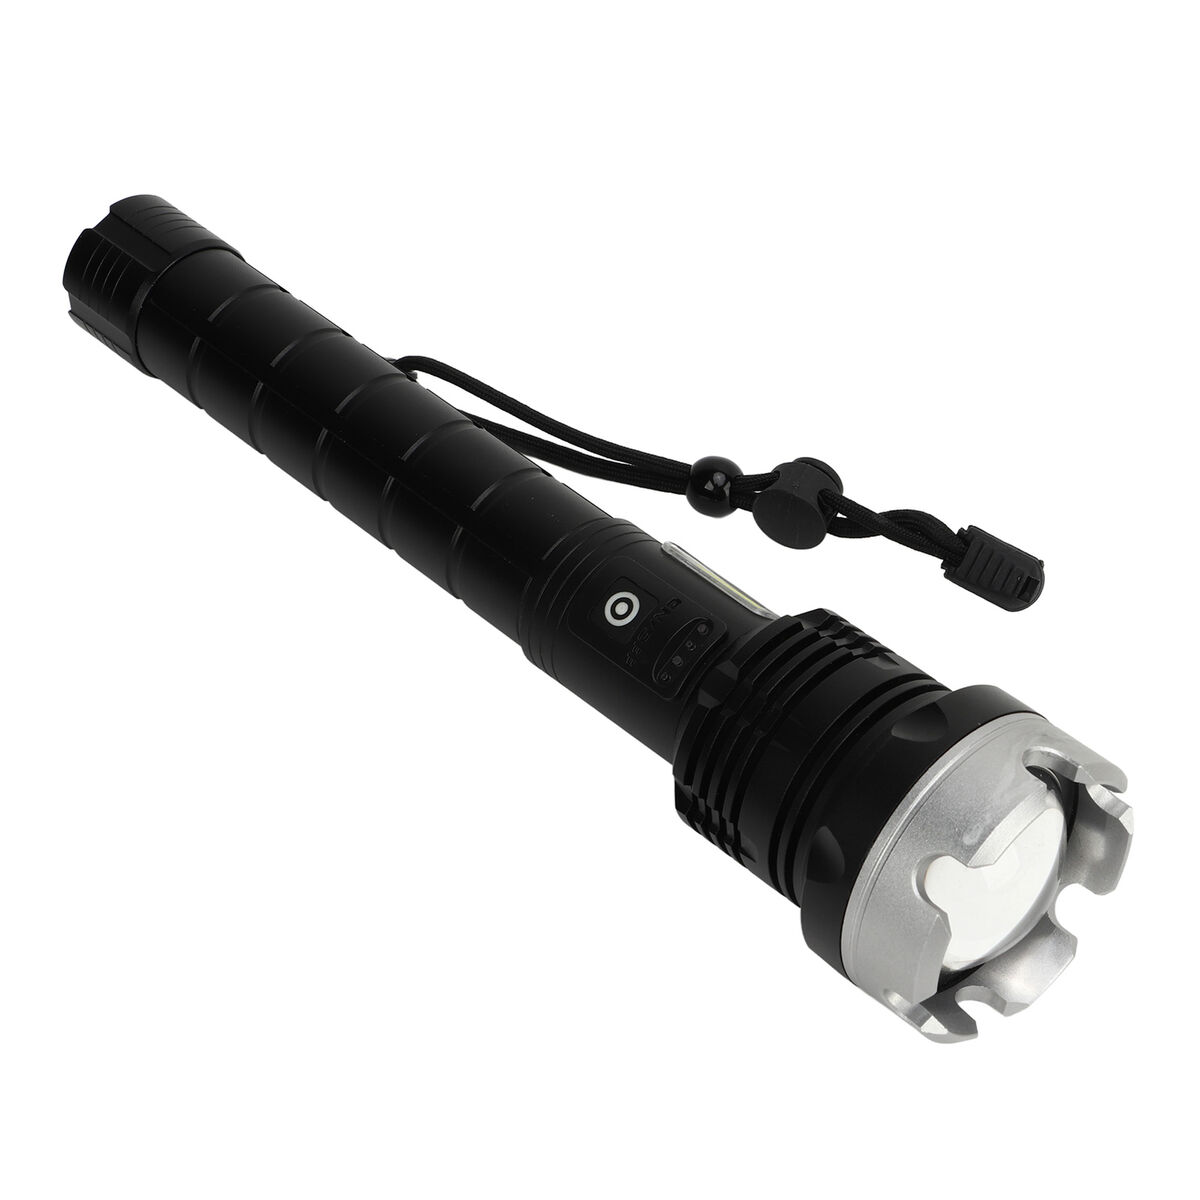 MUST READ  7 Best Flashlights For Travel And Camping